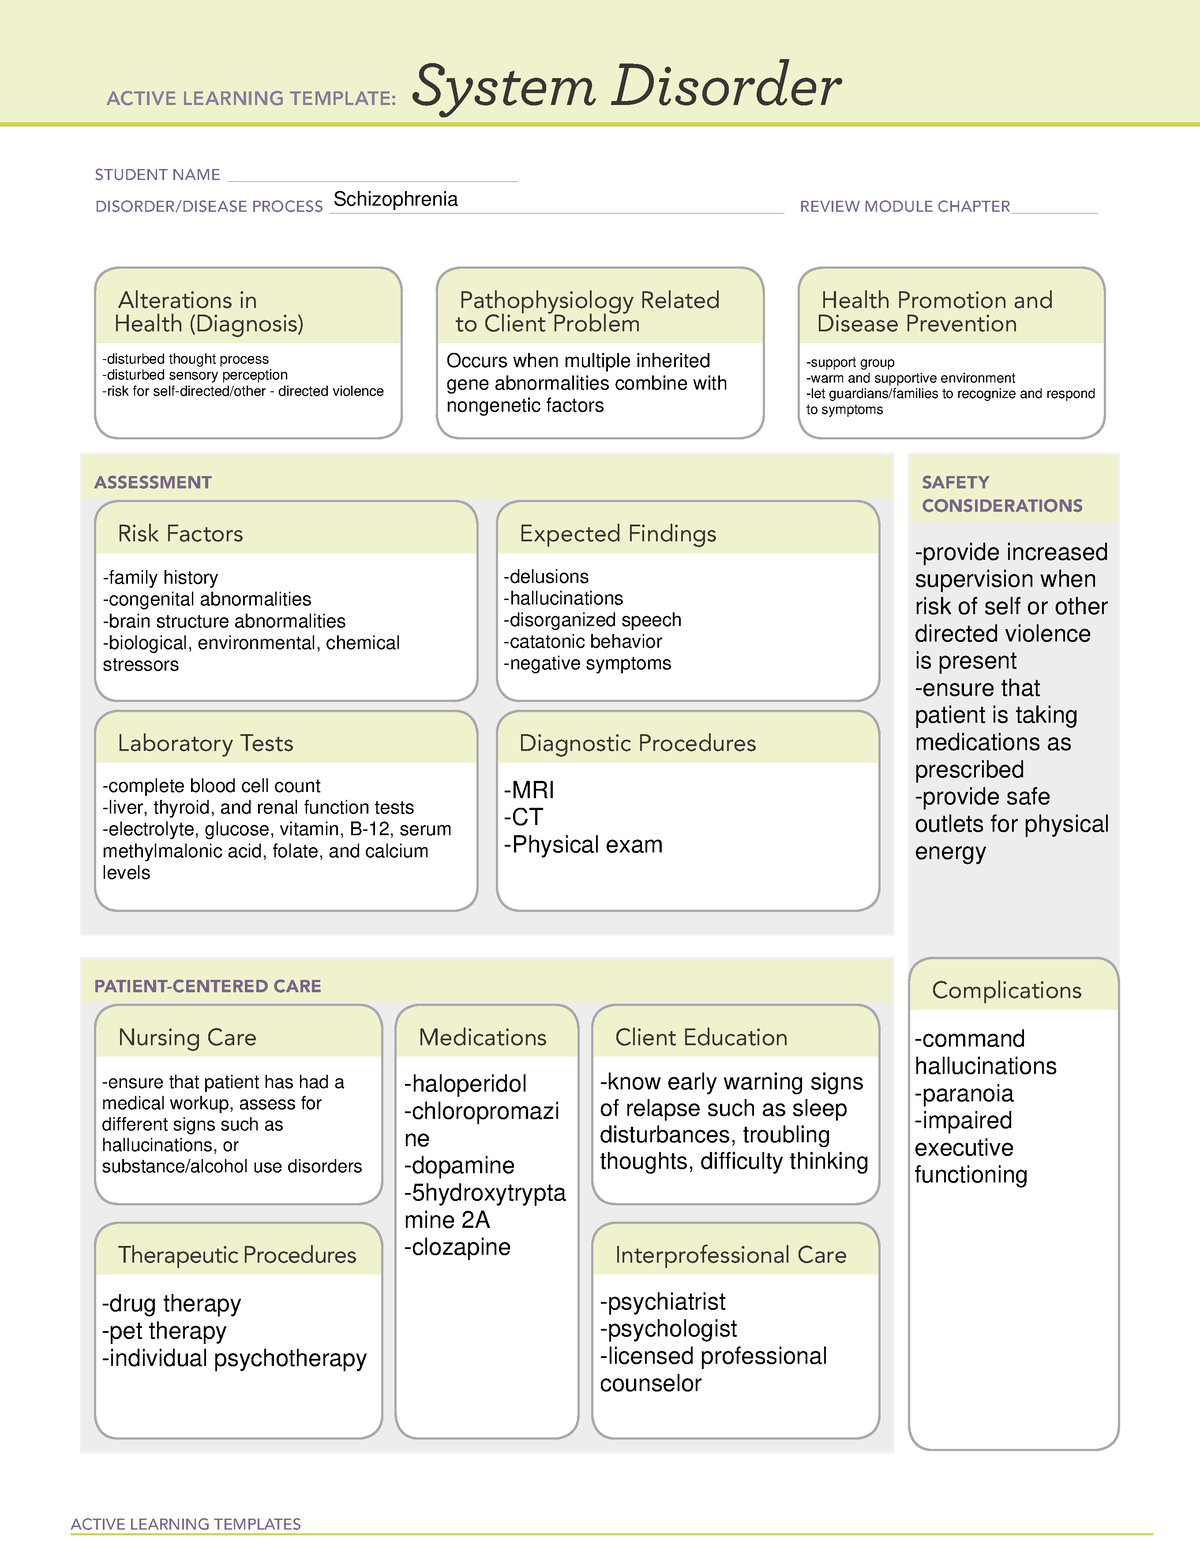 Schizophrenia system disorder ati template - ACTIVE LEARNING TEMPLATES ...